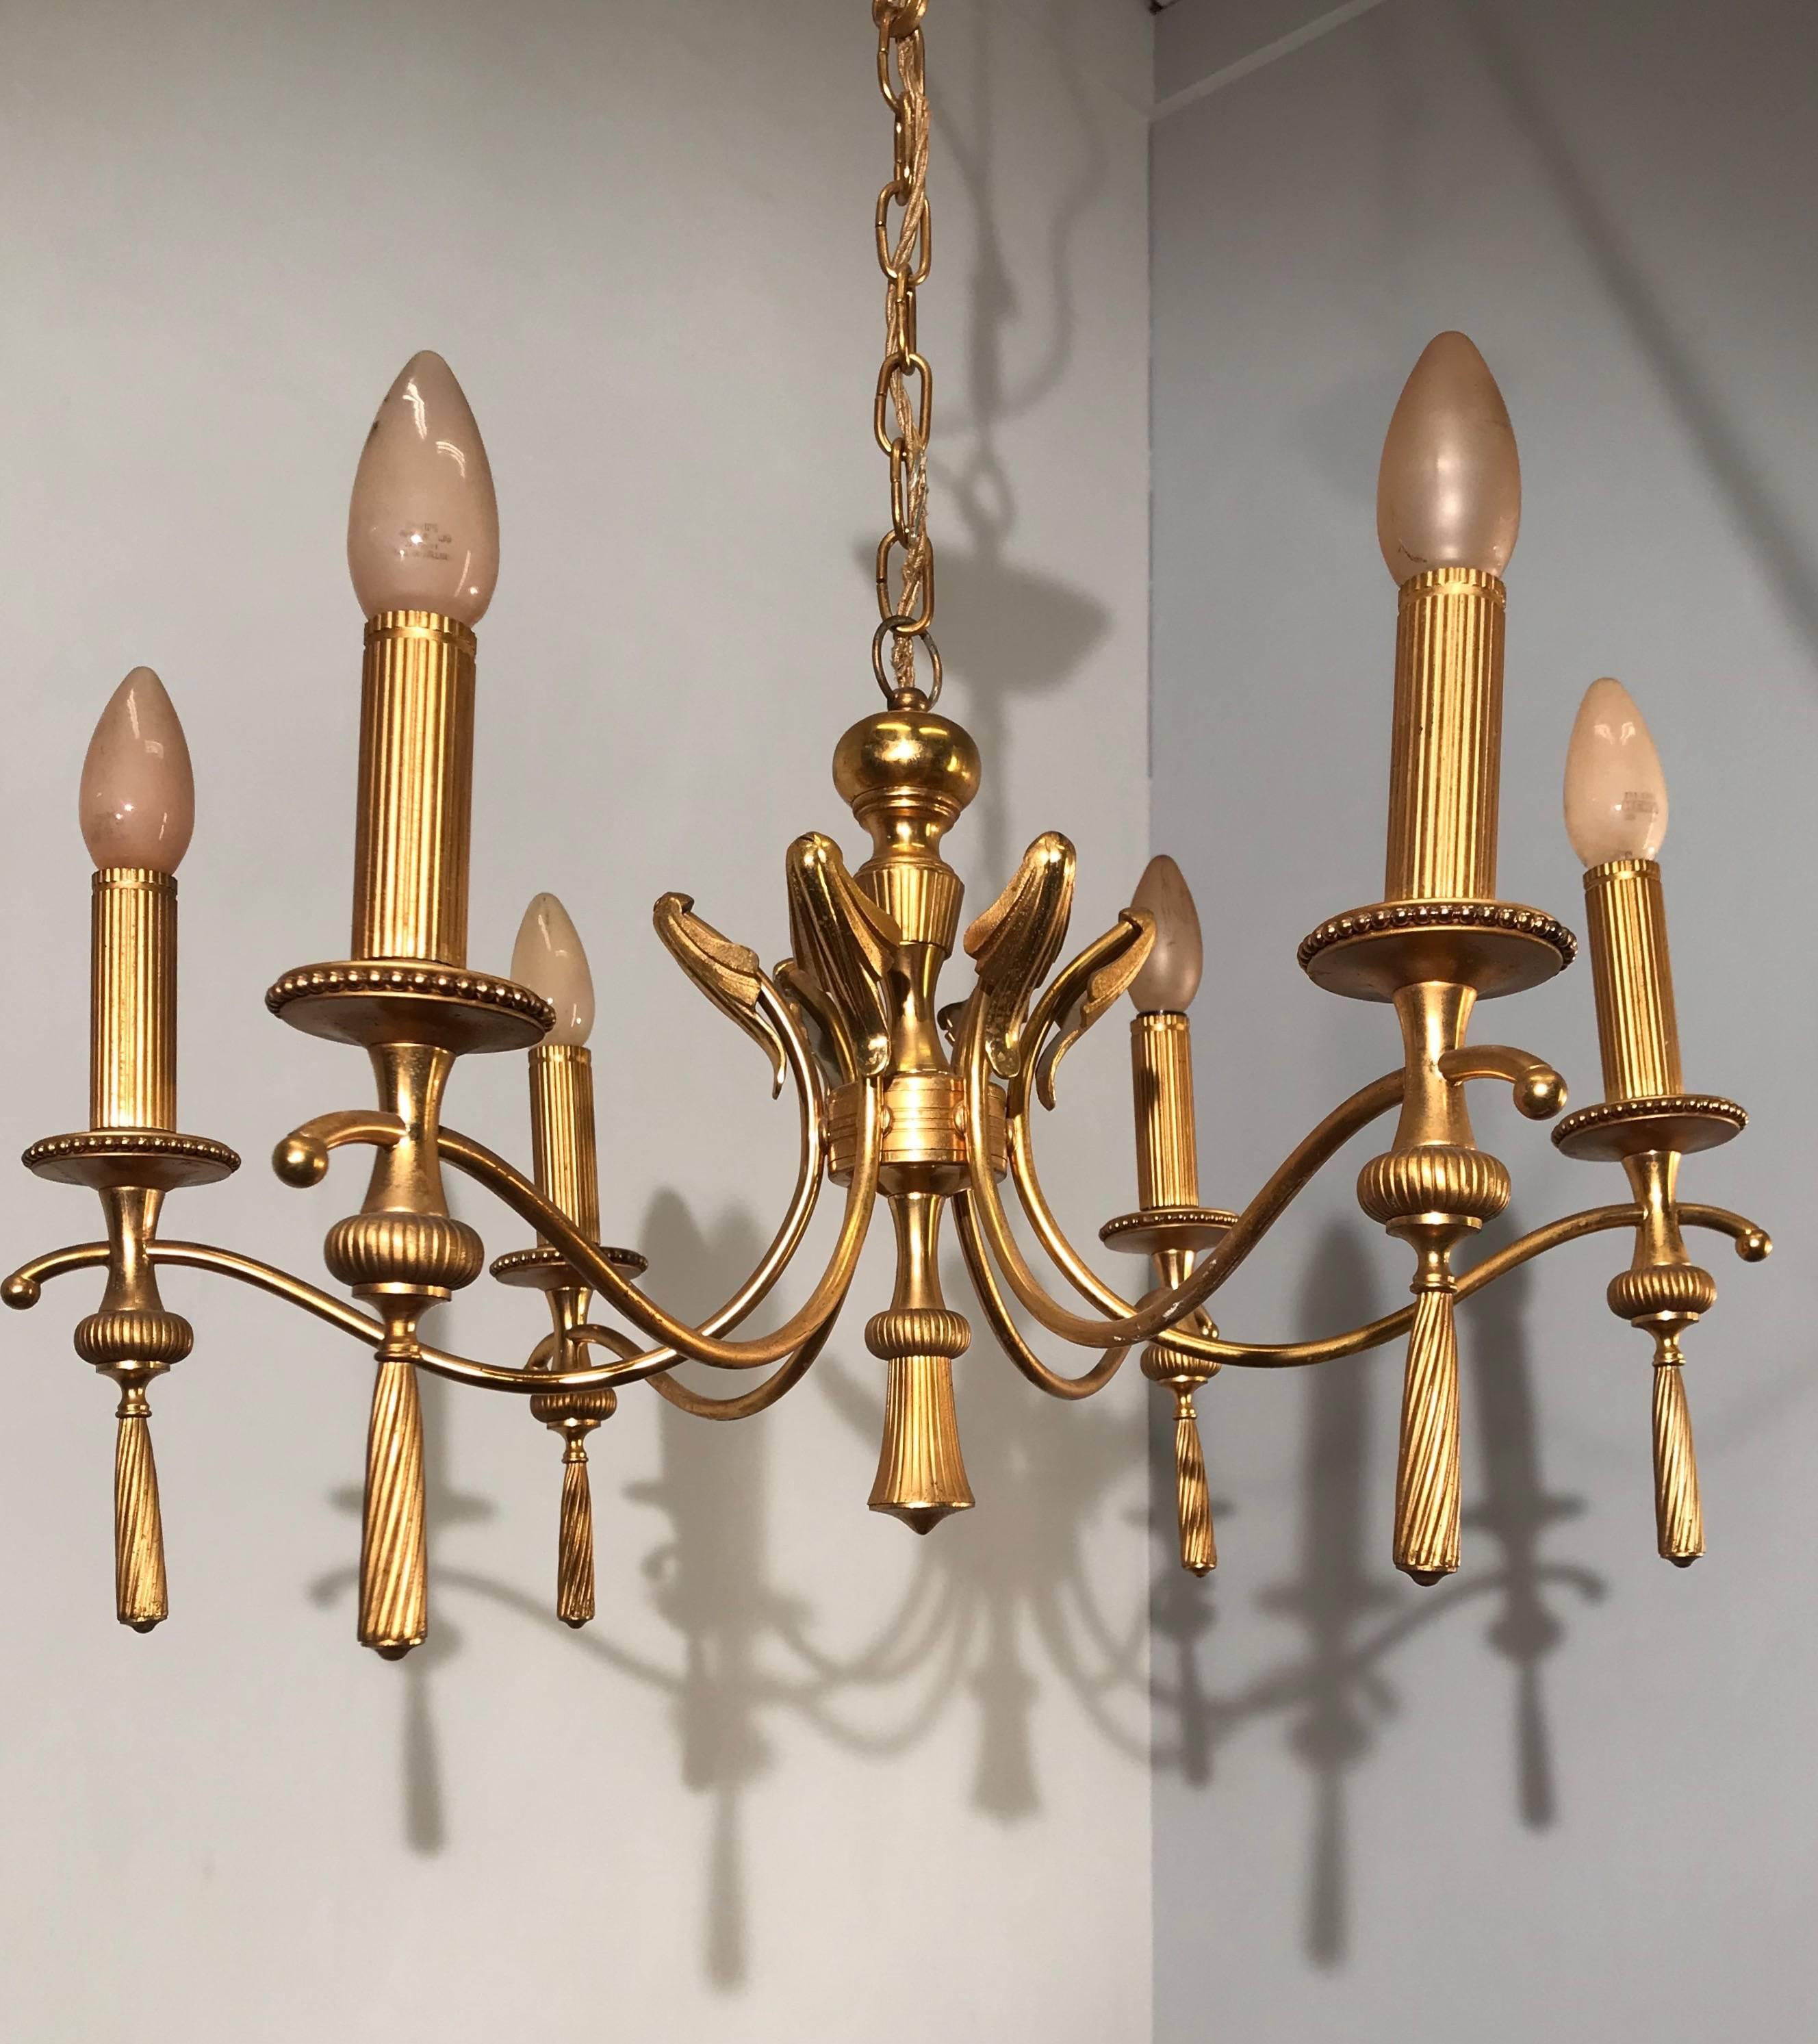 Rare midcentury, golden color light fixture.

This gold colored, Italian pendant is as stylish as they come. The shape and overall look and feel is truly elegant and graceful. This midcentury era pendant can really be the icing on the cake to your